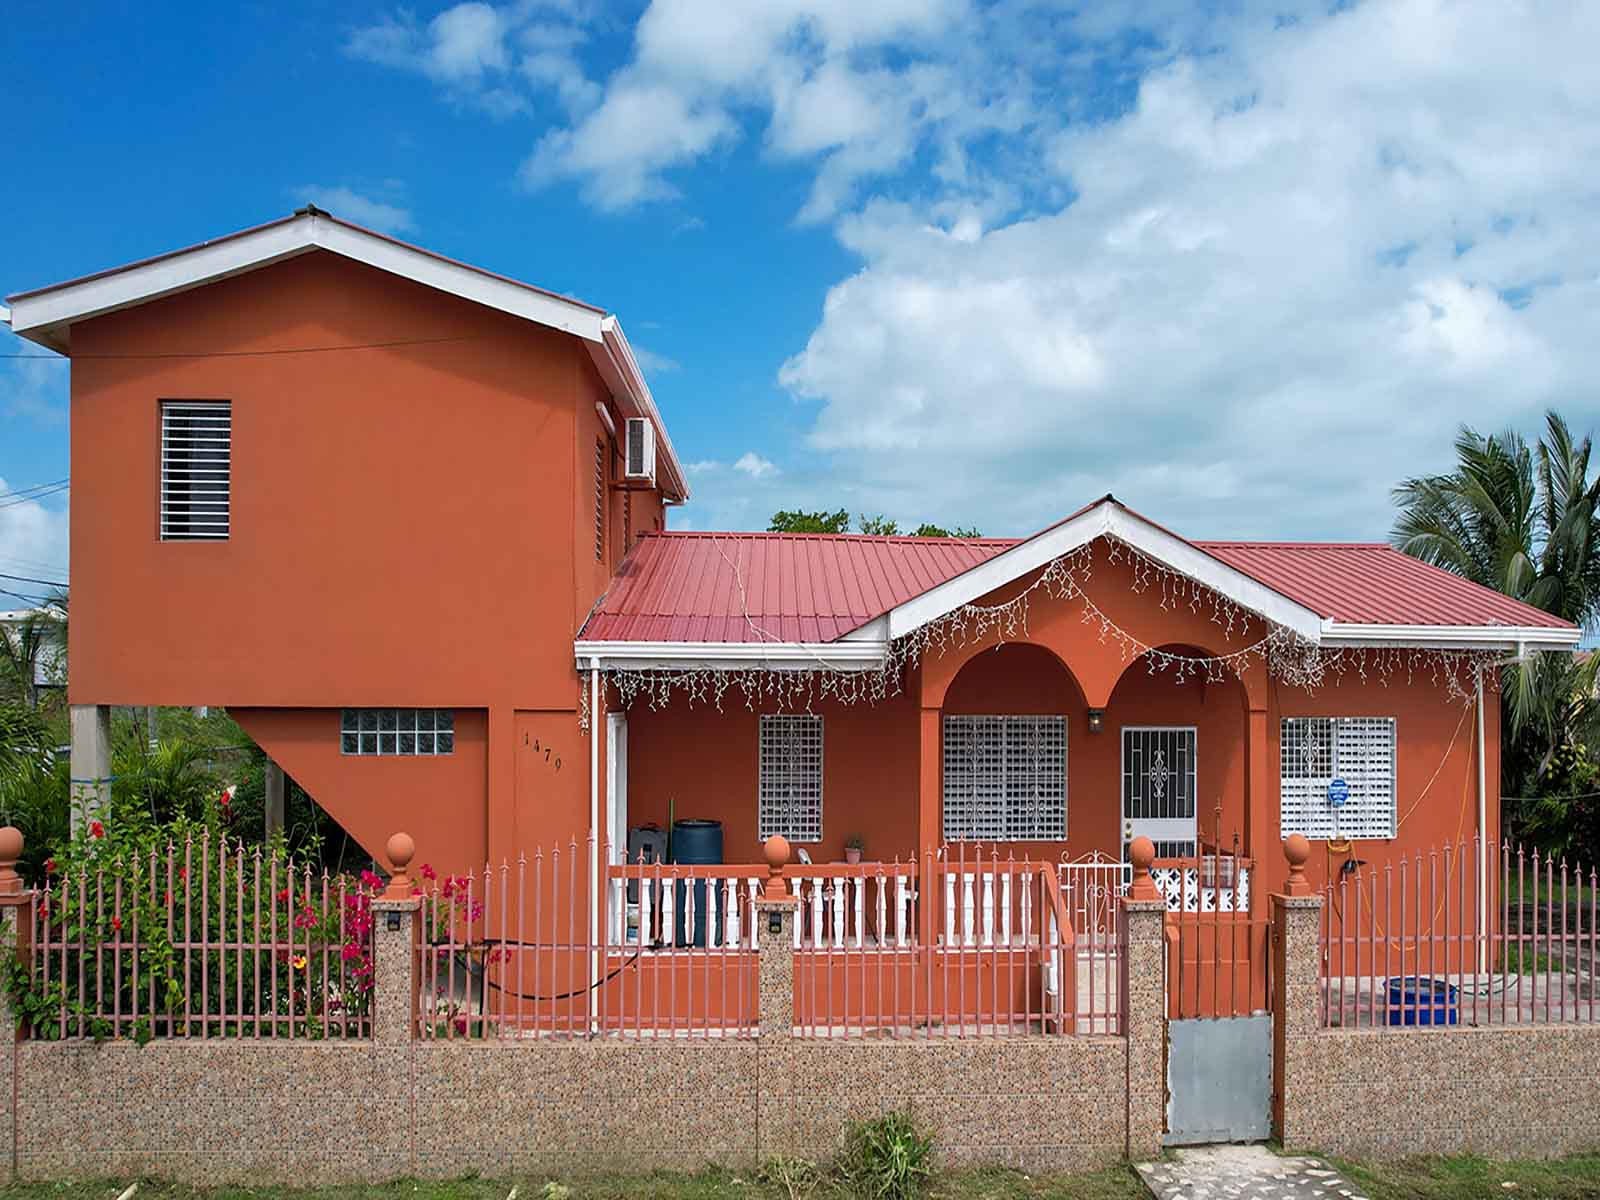 FOR RENT: 3 Bed House, near Durgeon drive, Belize City.